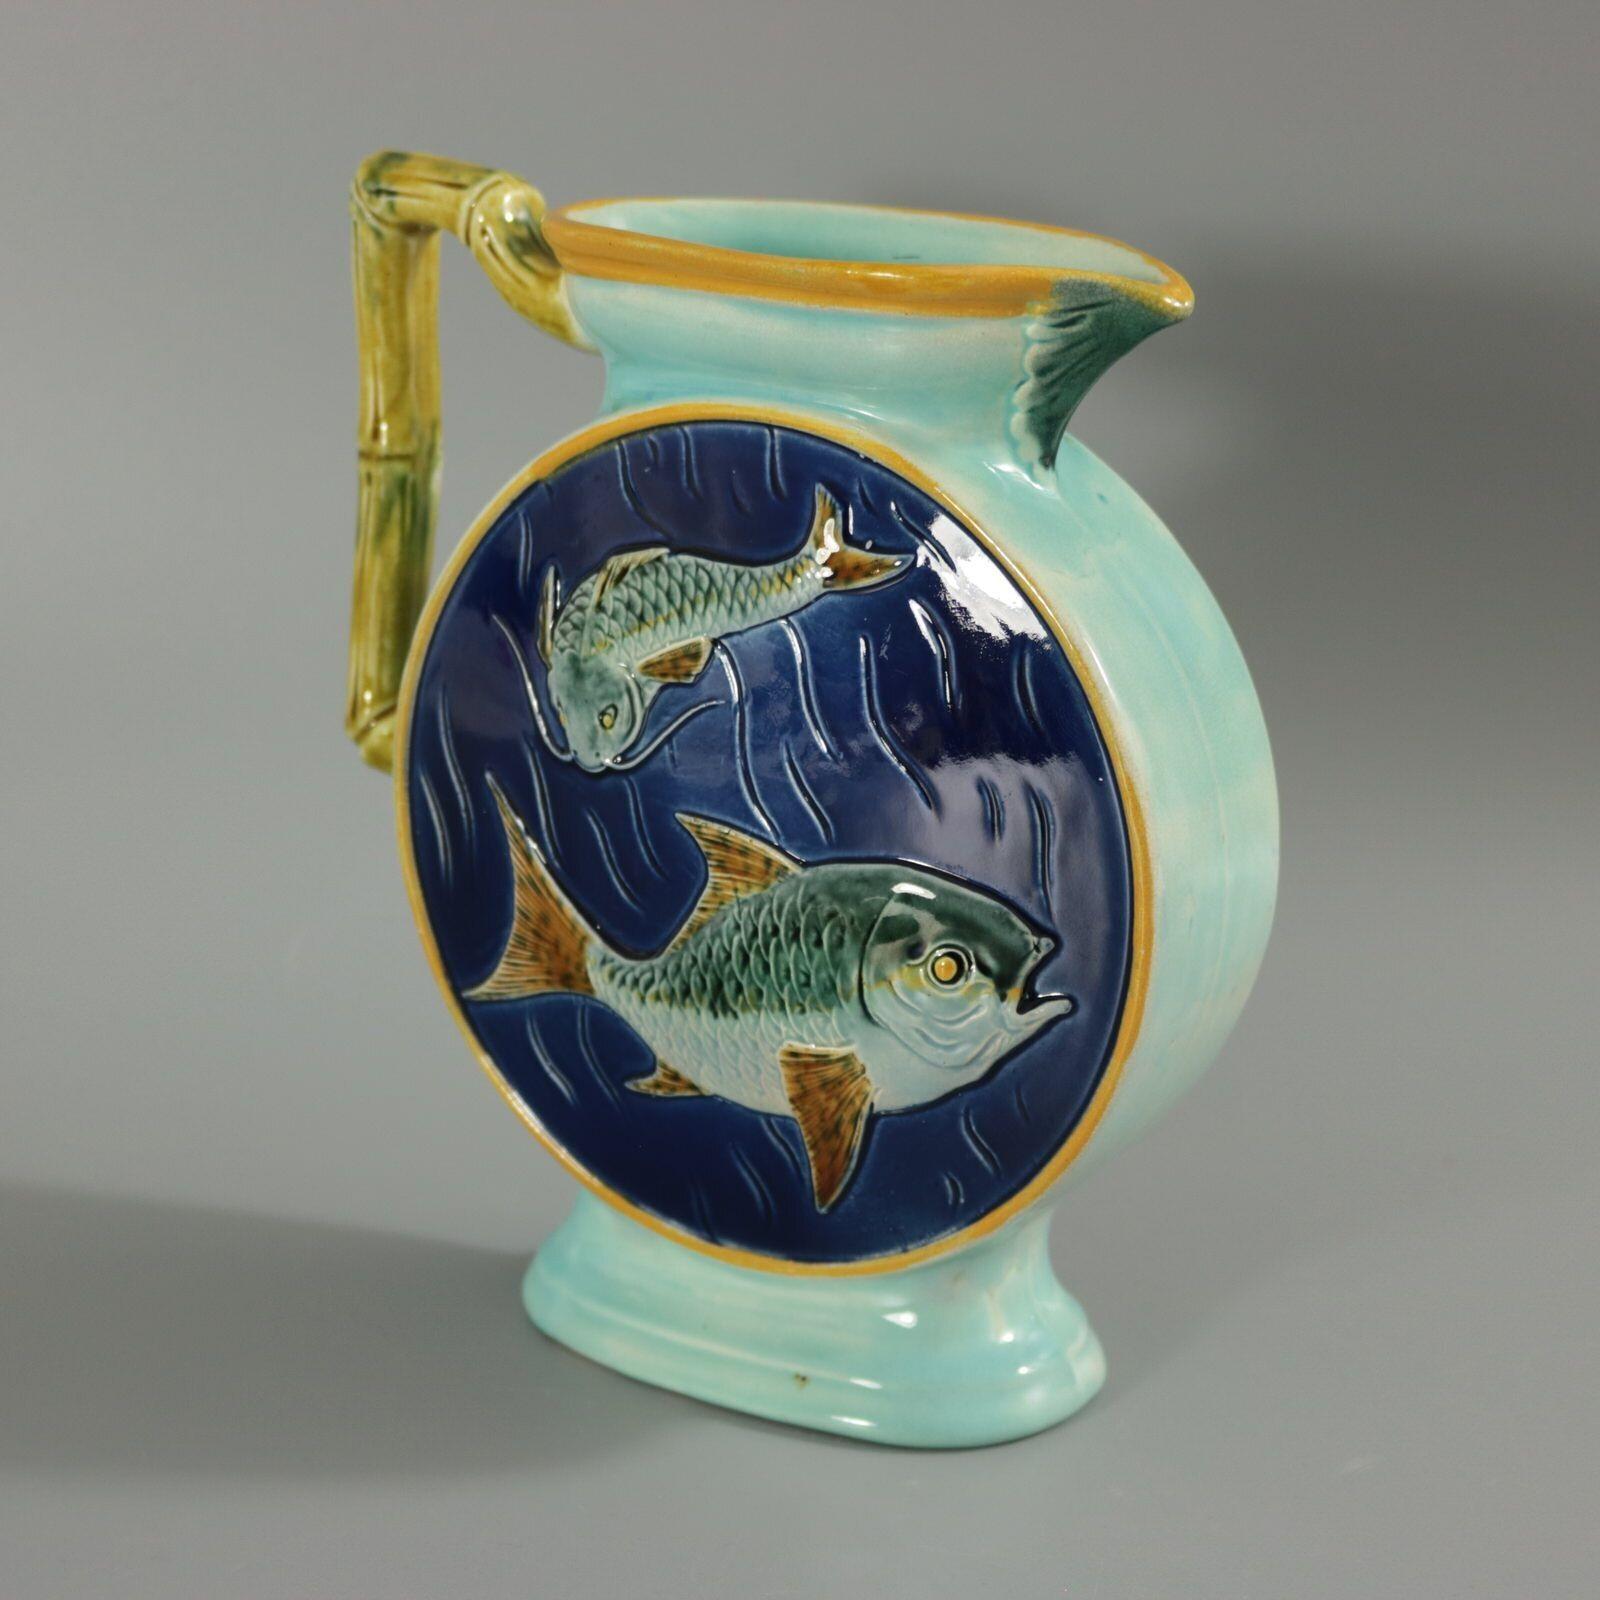 Holdcroft Majolica jug/pitcher which features two fish (carp) swimming and a bamboo handle. Colouration: cobalt blue, turquoise, brown, are predominant. The piece bears maker's marks for the Holdcroft pottery. Bears a pattern number, '79'. English